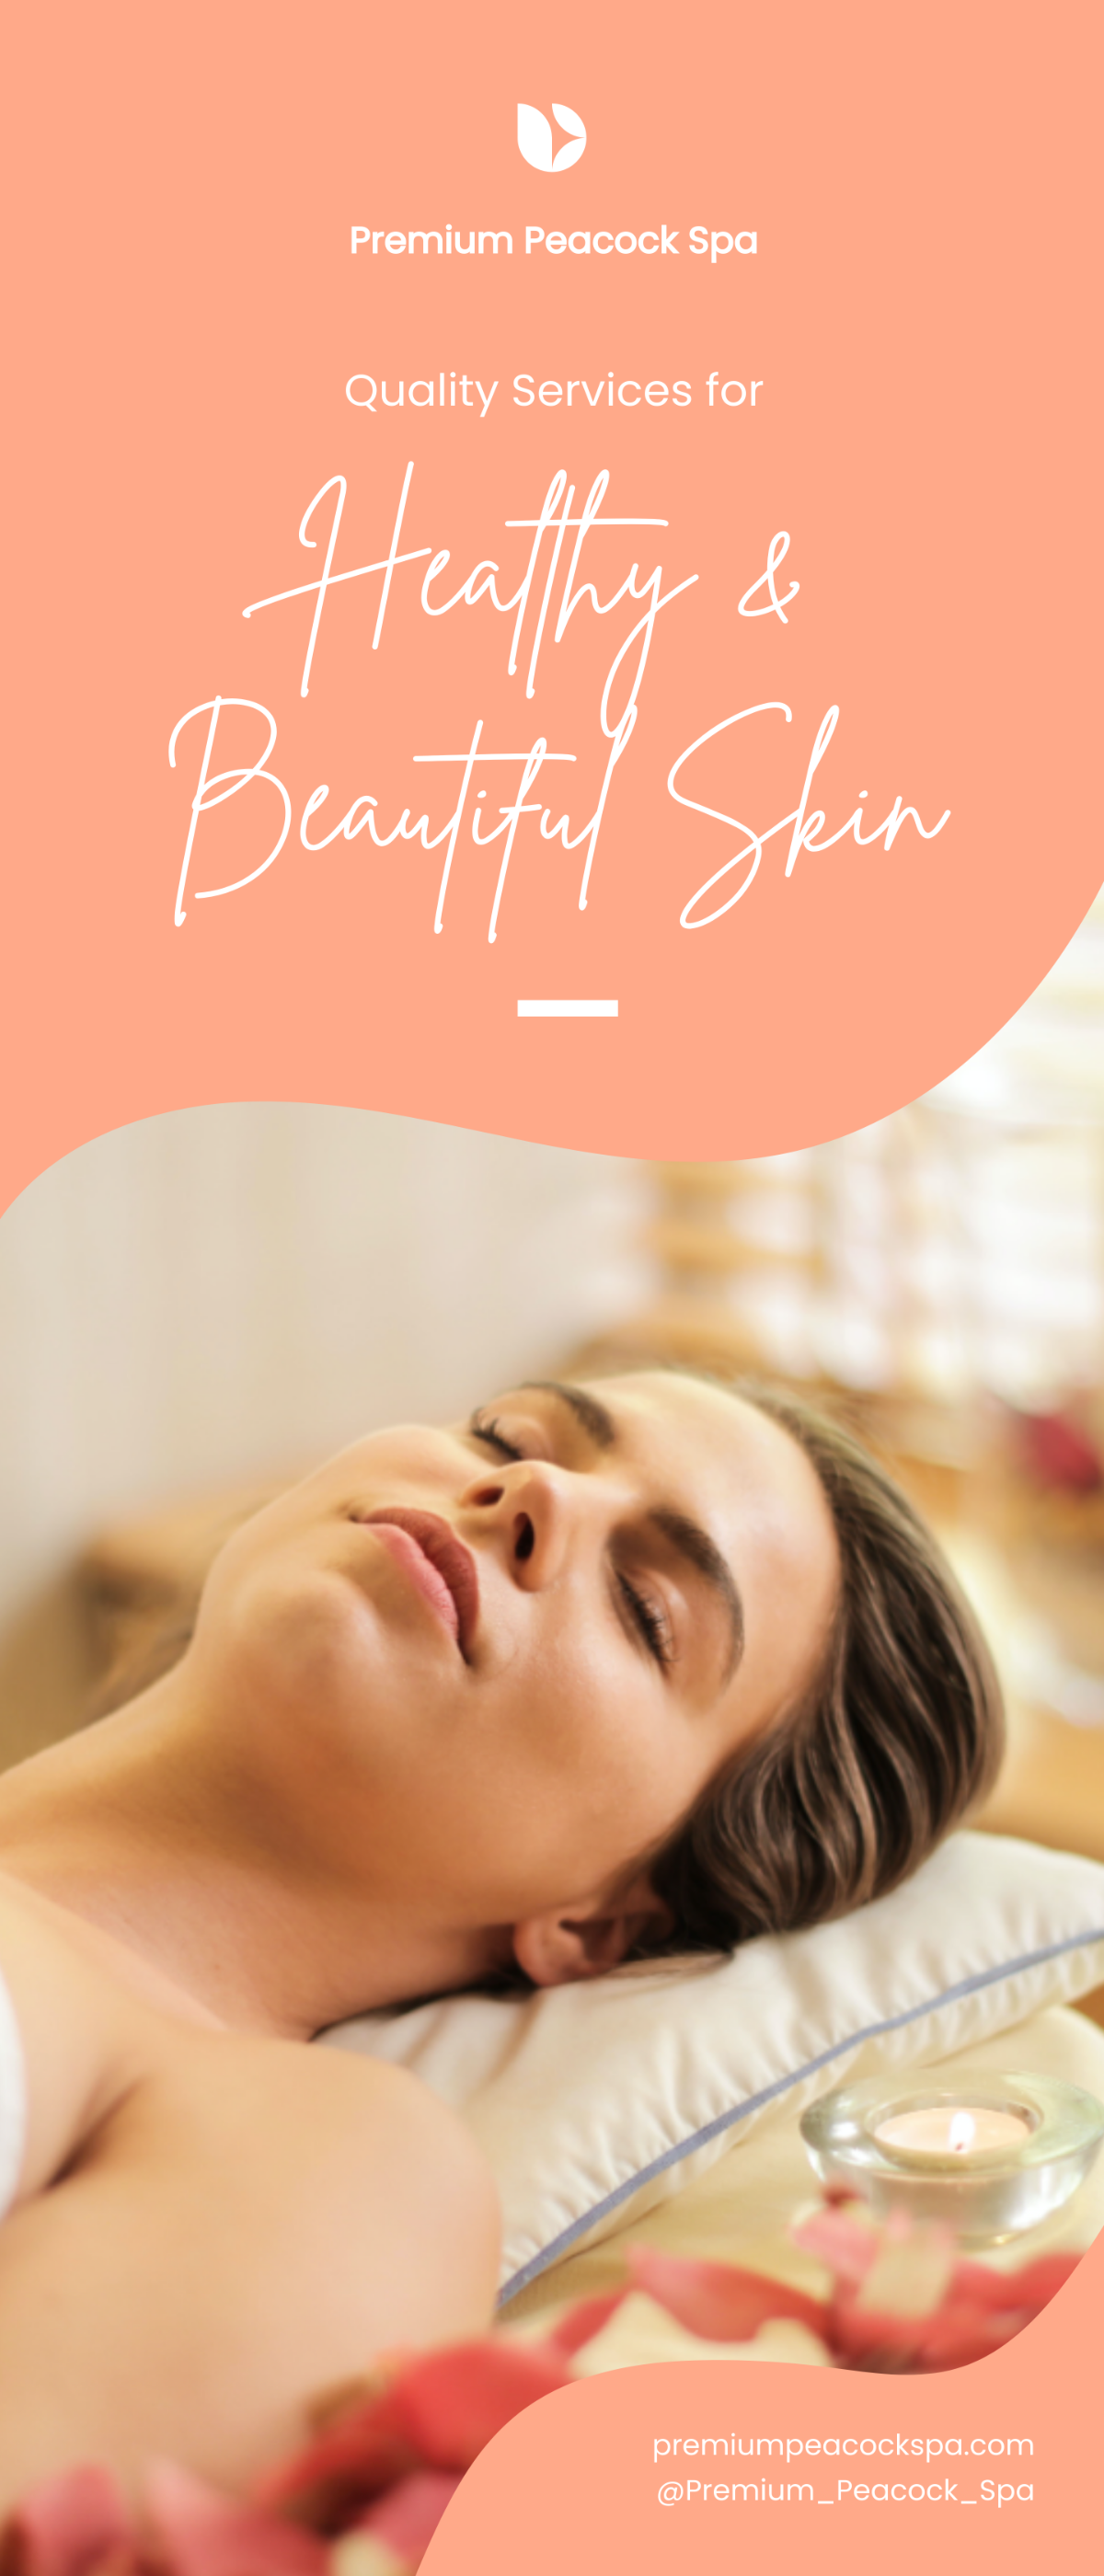 Spa Beauty Roll Up Banner